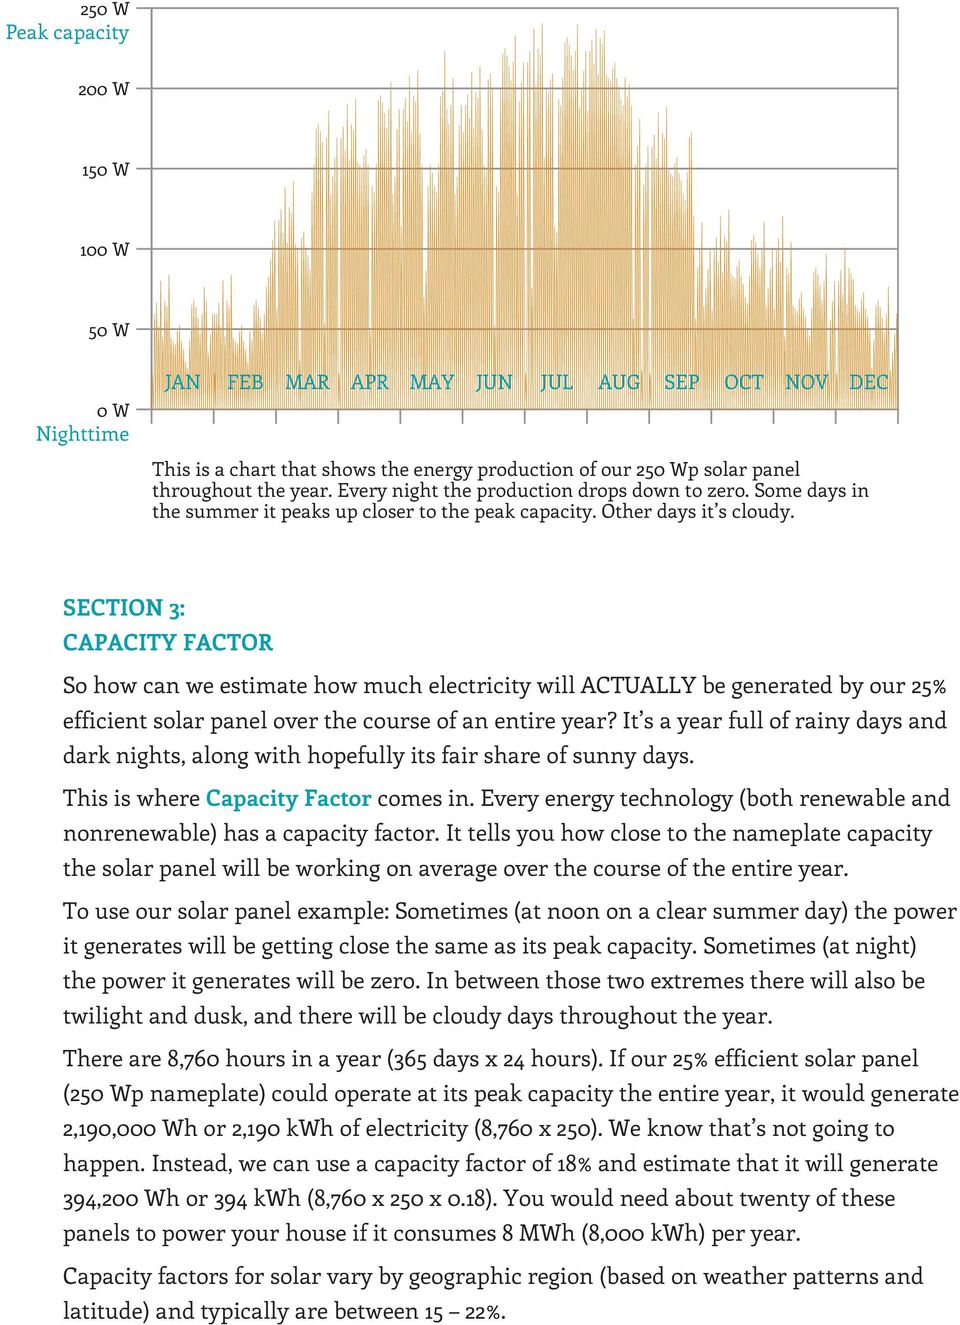 DEC SECTION 3: CAPACITY FACTOR So how can we estimate how much electricity will ACTUALLY be generated by our 25% efficient solar panel over the course of an entire year?